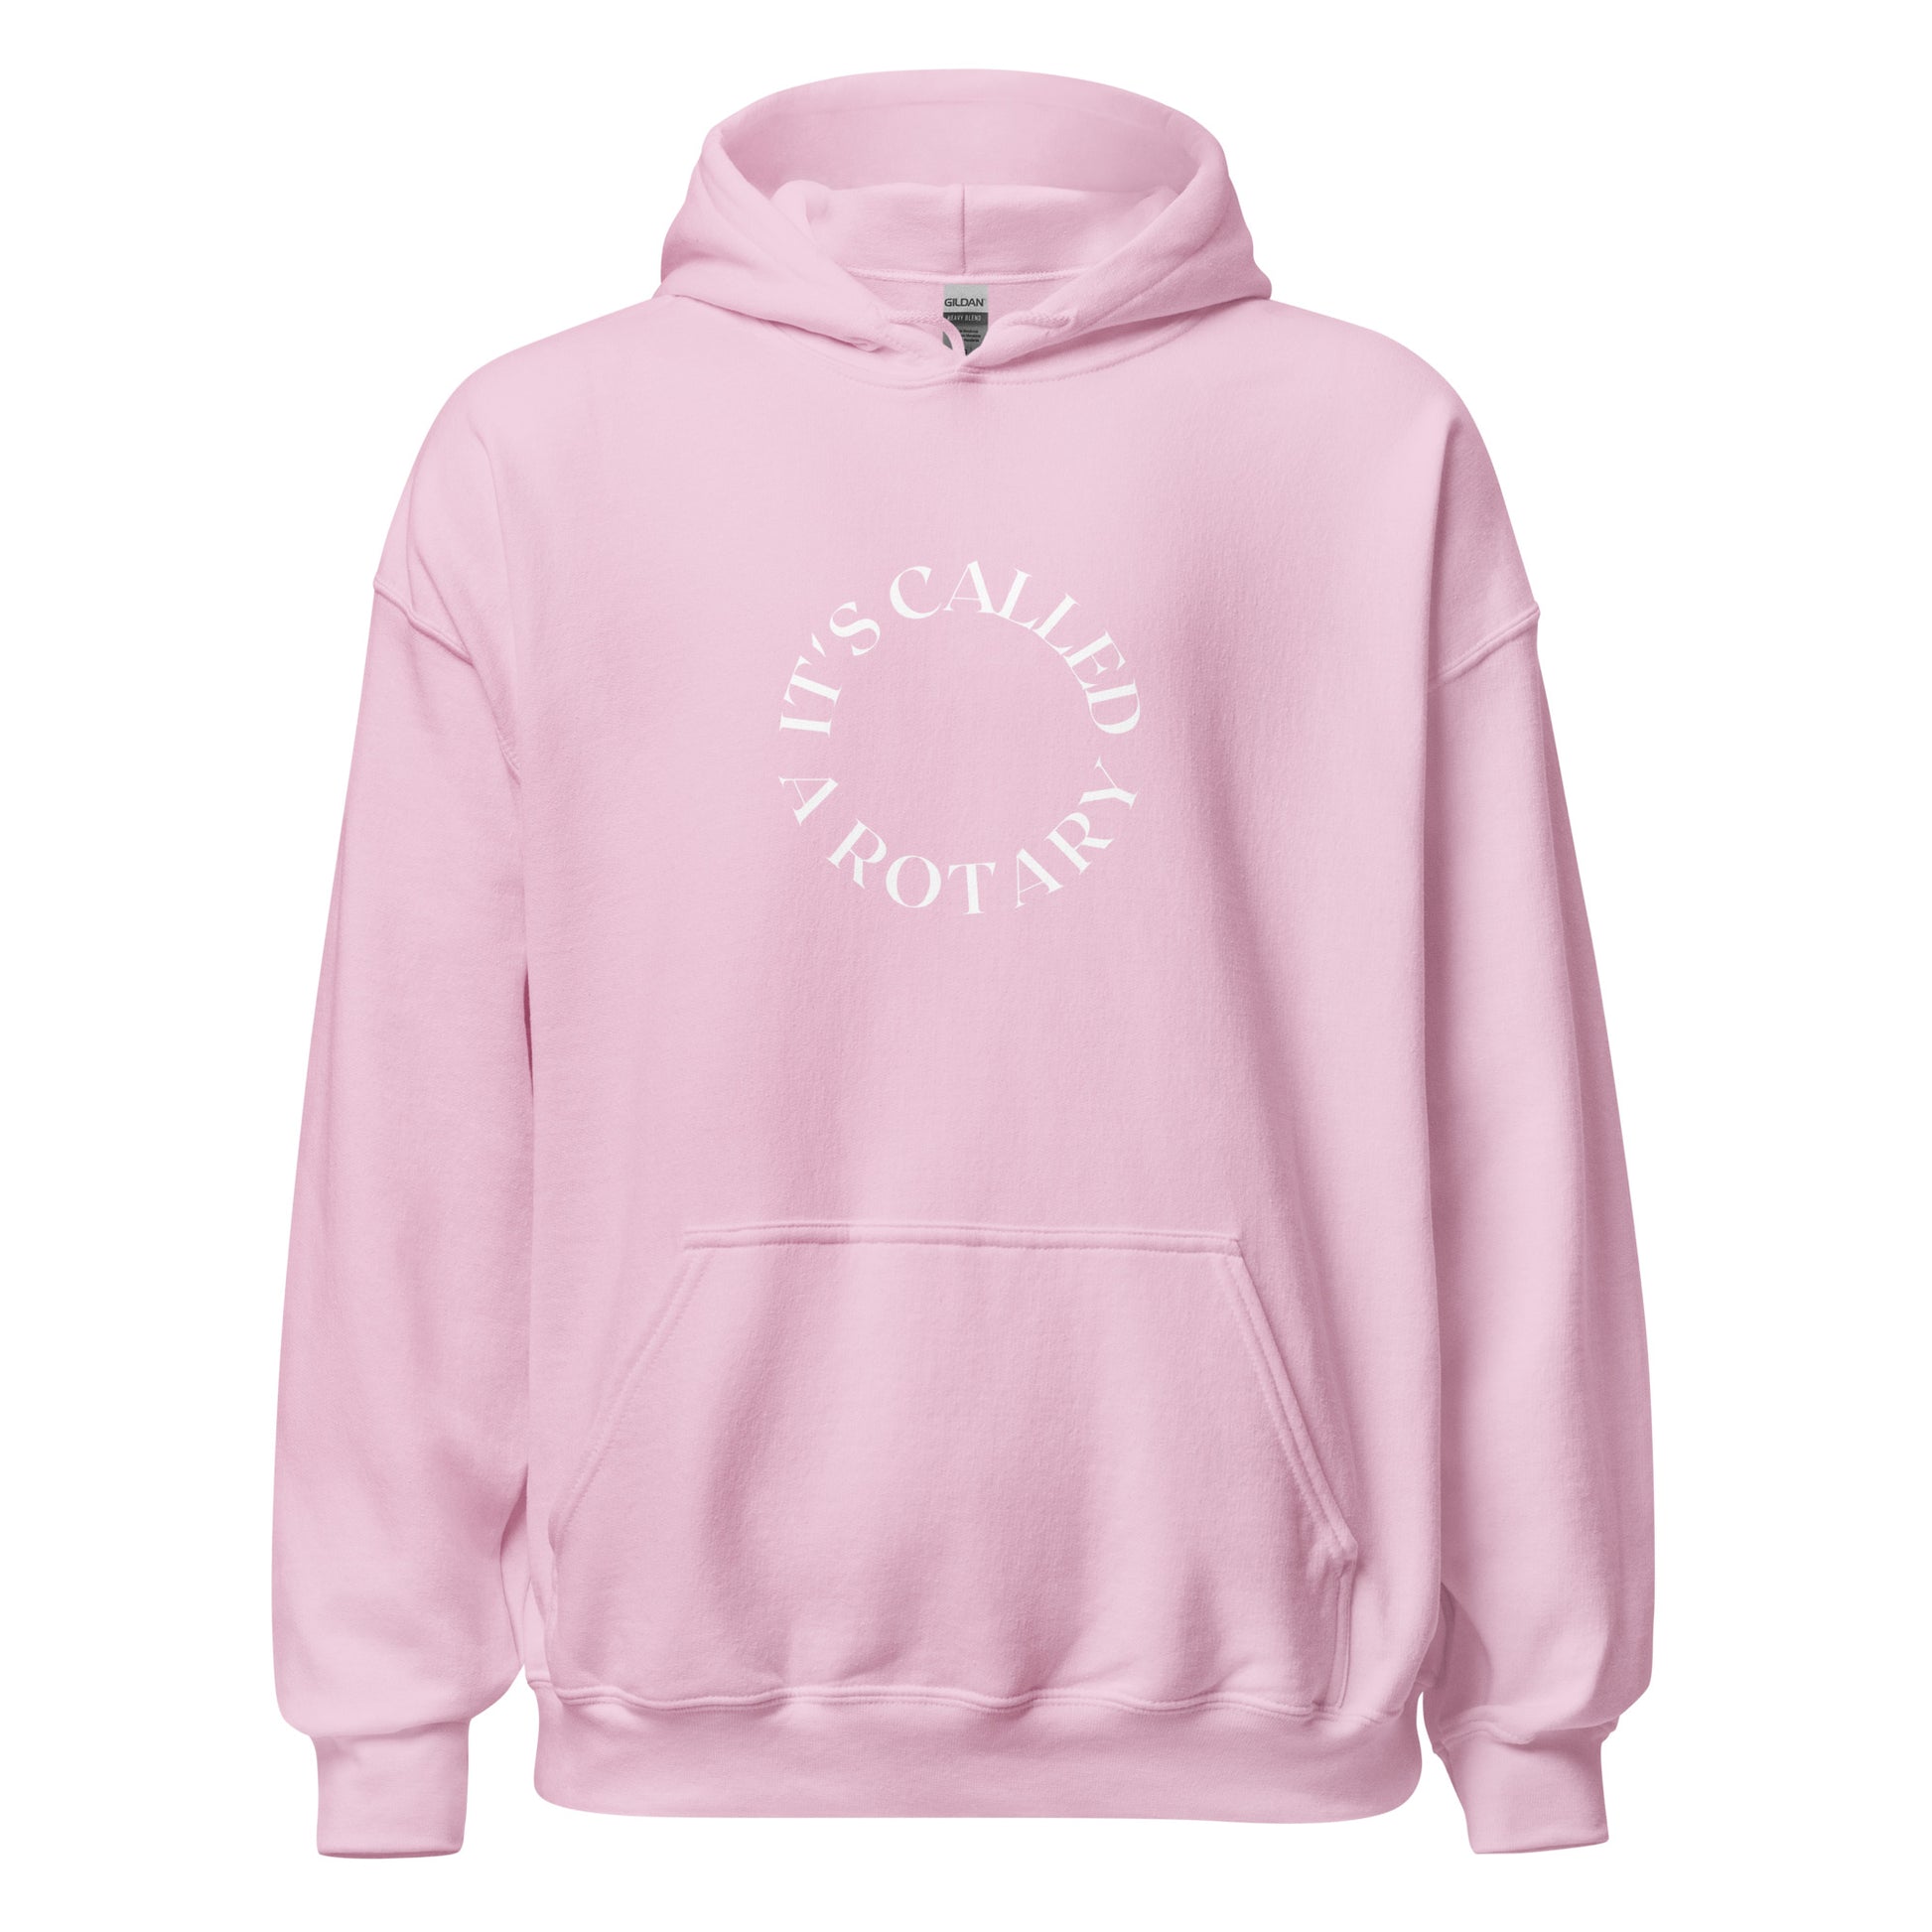 pink hoodie that saying "it's called a rotary" in white lettering shaped in a circle